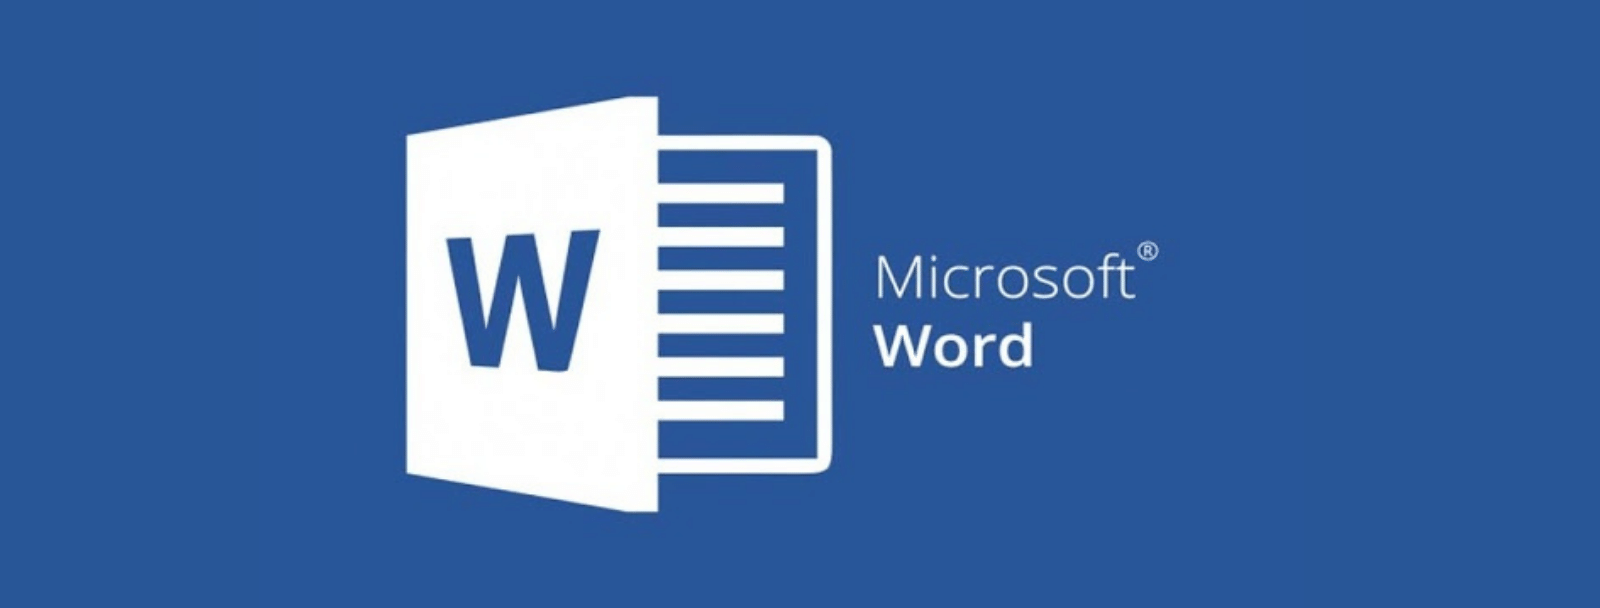 Featured image for “10 Advanced Microsoft Word Tips & Tricks”